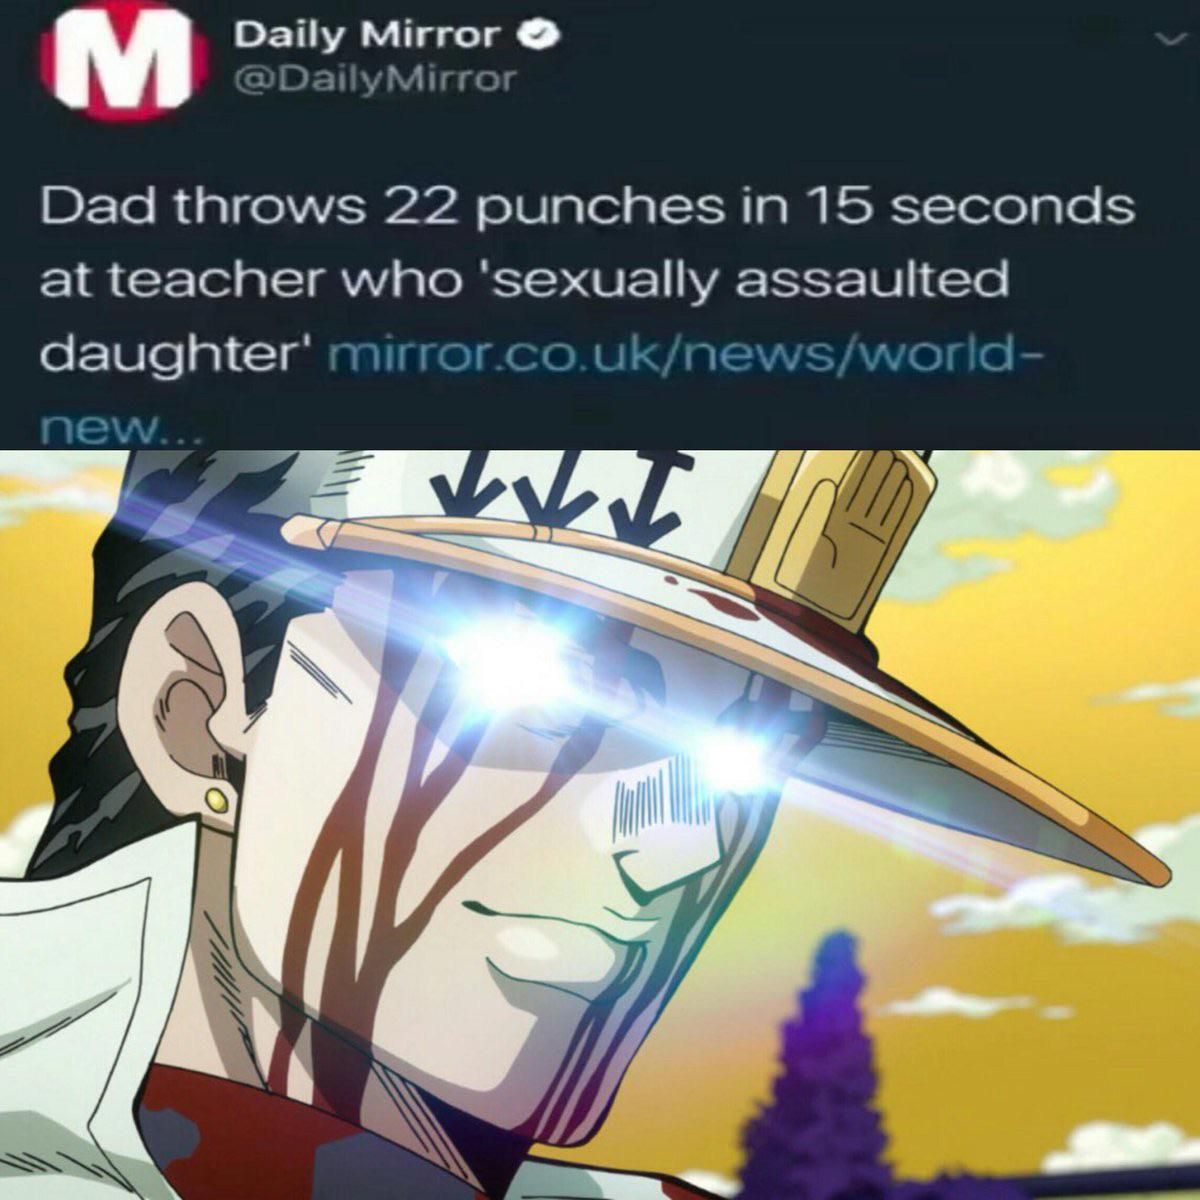 Is that dad a stand user?